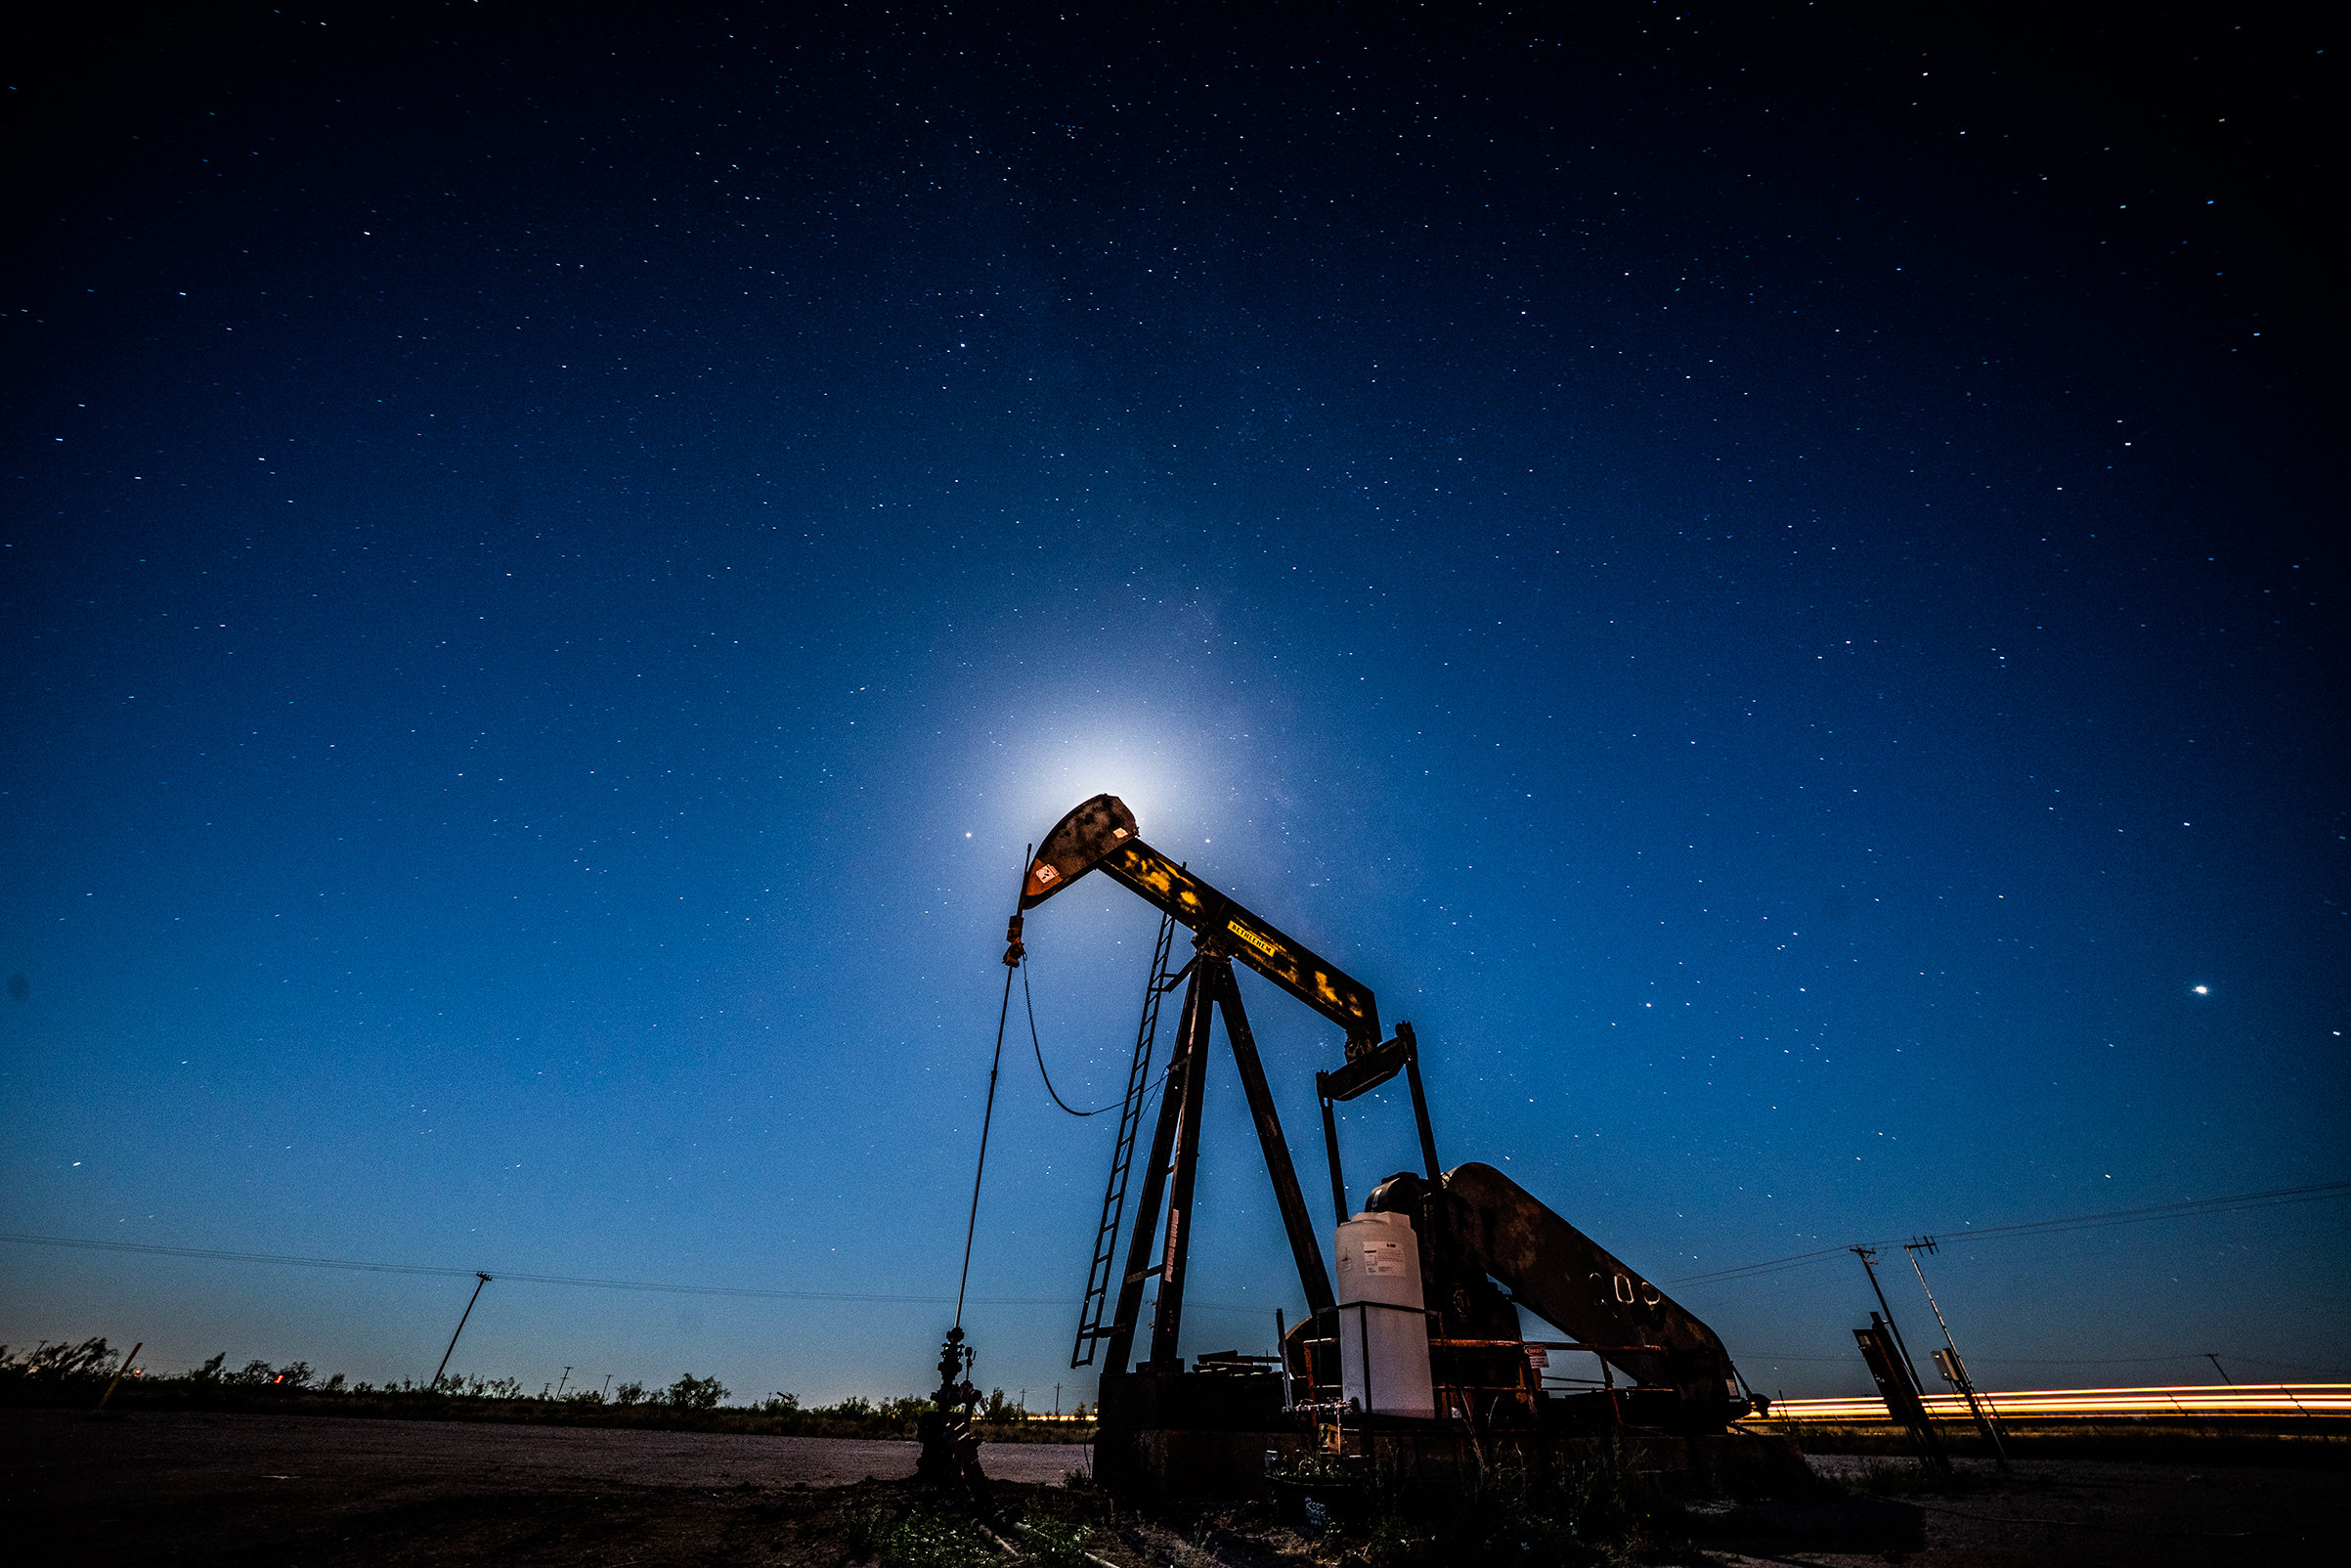 An oil pump churns in Midland, Texas, the heart of the Permian Basin oil boom (Benjamin Lowy—Getty Images)